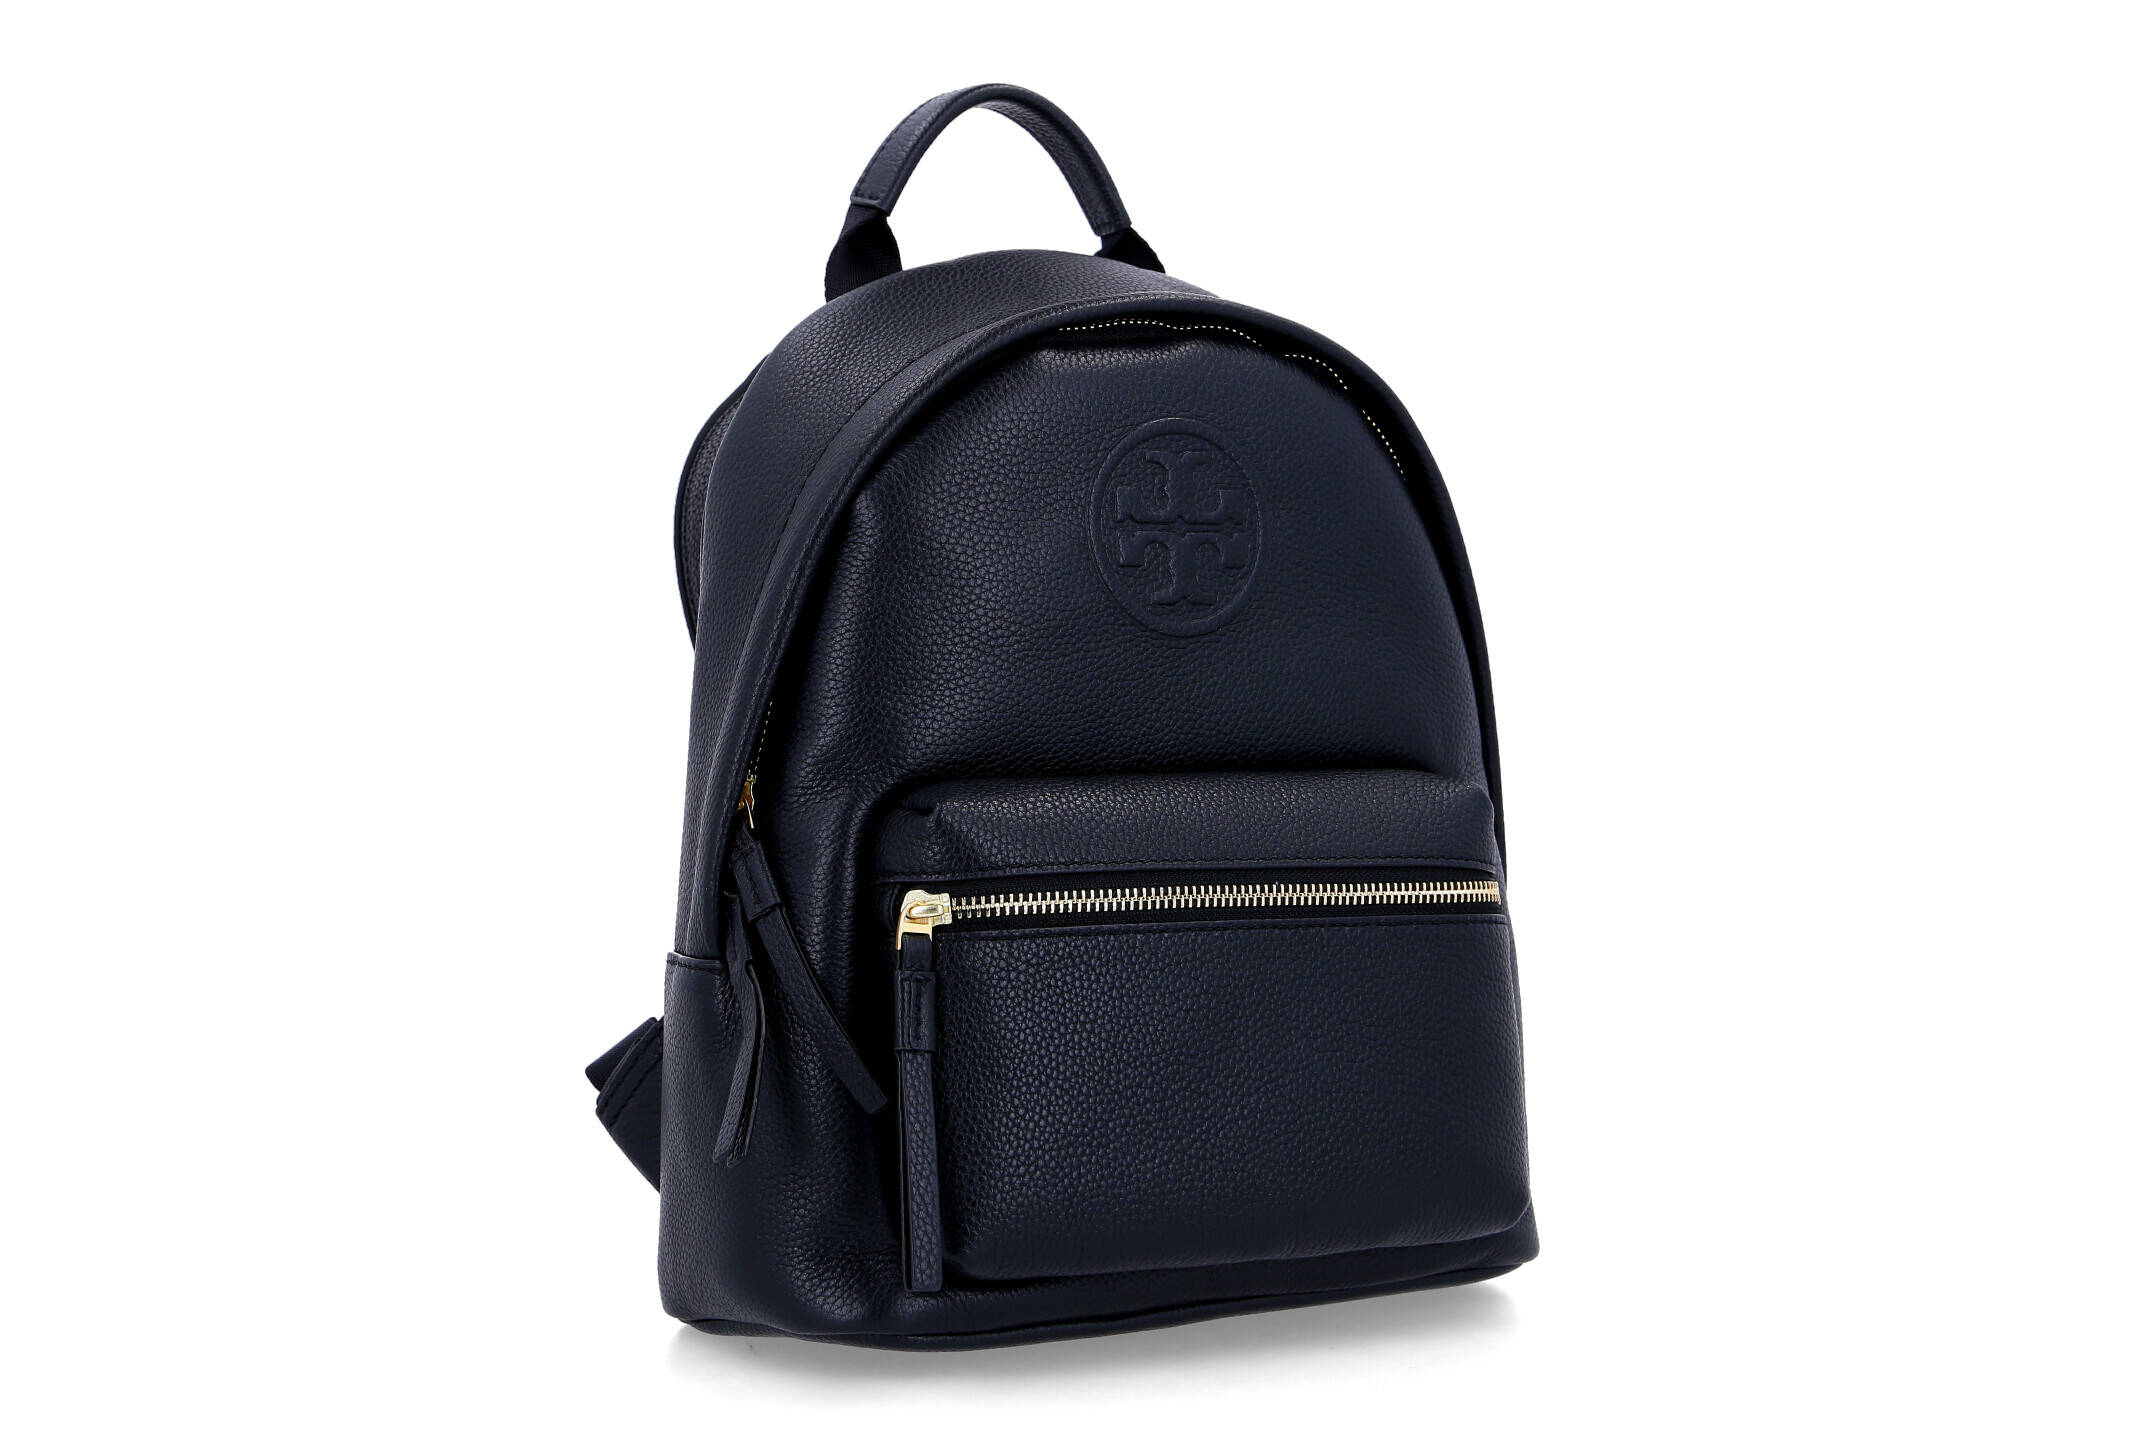 Leather backpack PERRY BOMBE TORY BURCH | Black | Gomez.pl/en